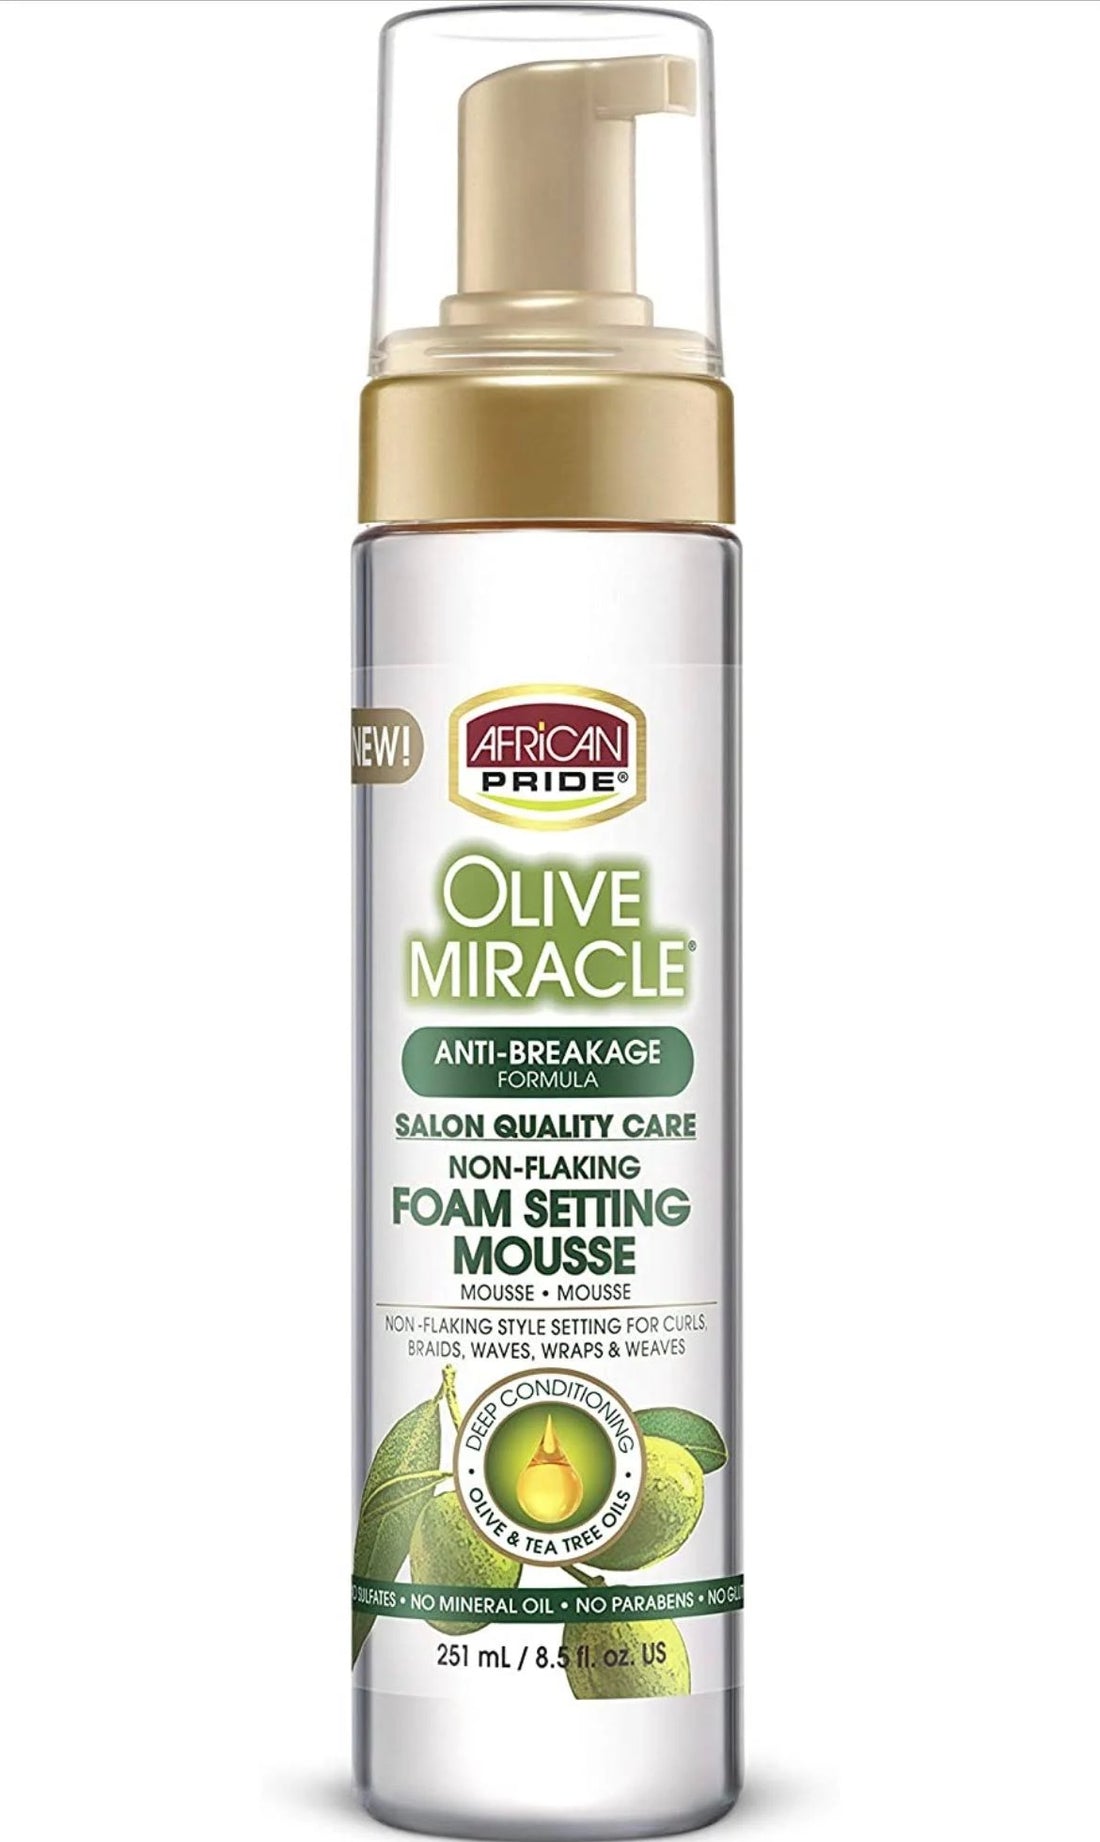 AFRICAN PRIDE OLIVE MIRACLE FOAM SETTING MOUSSE 8.5OZ